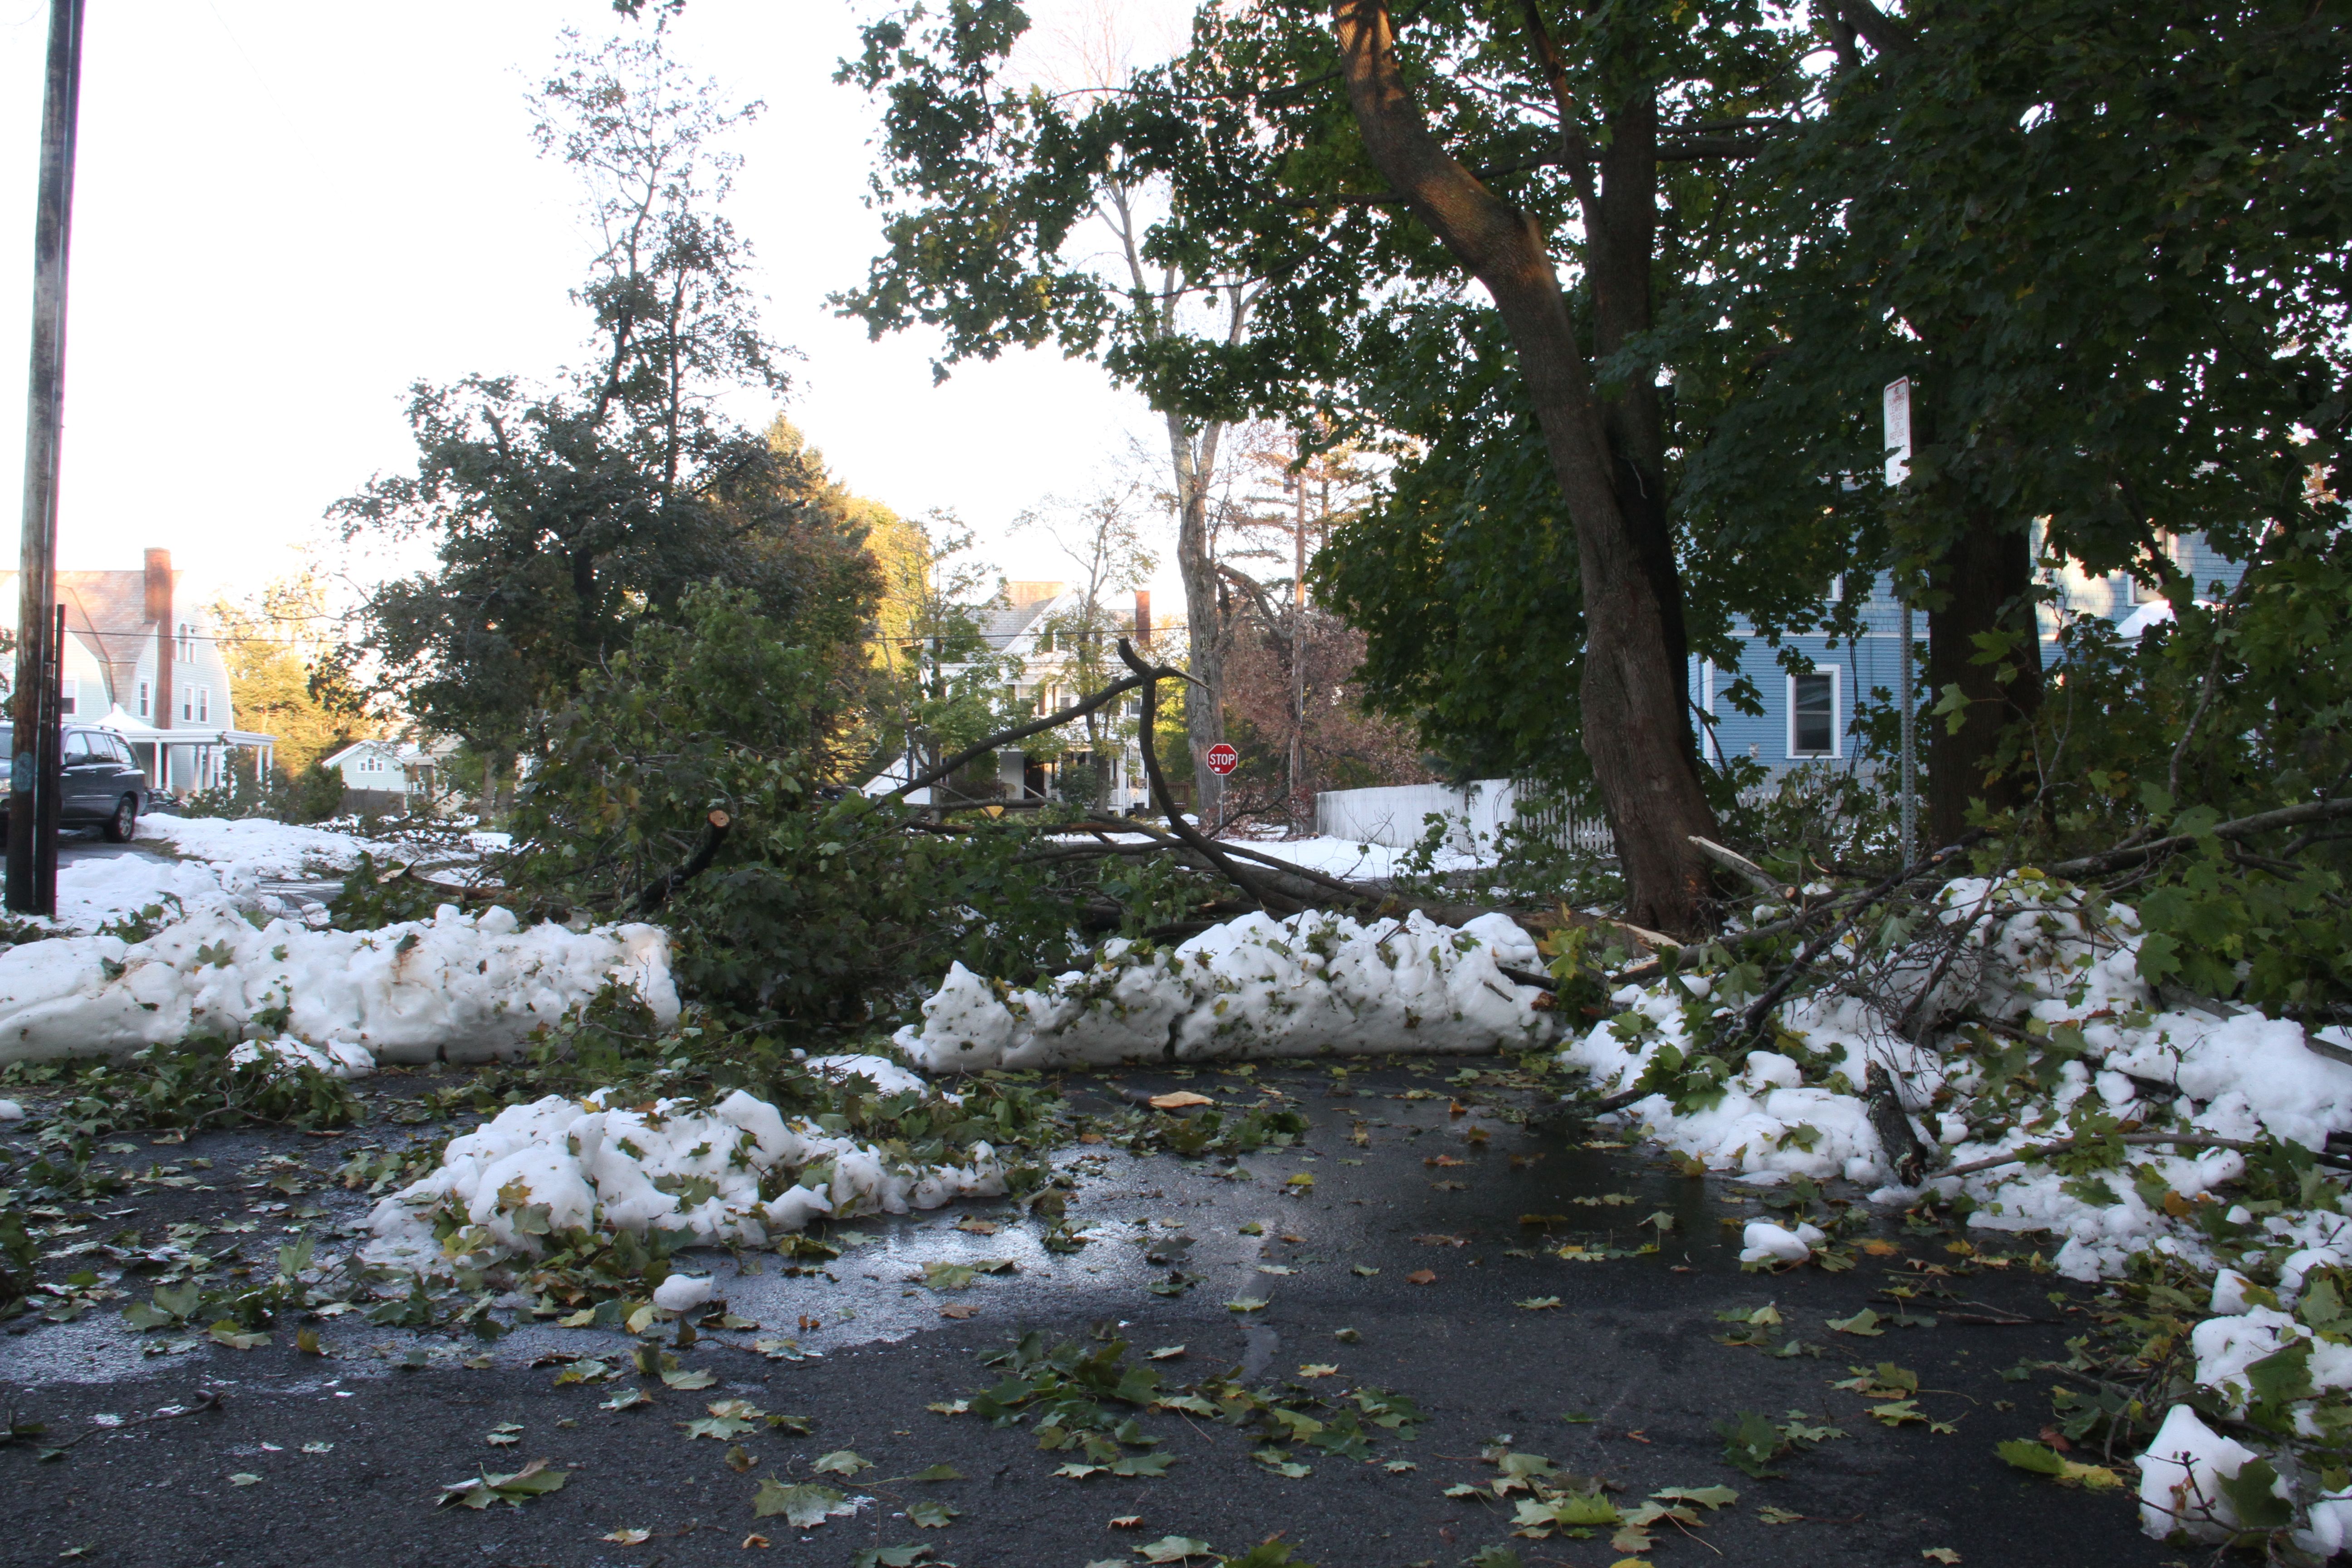 A few streets over the downed branches got bigger and bigger.